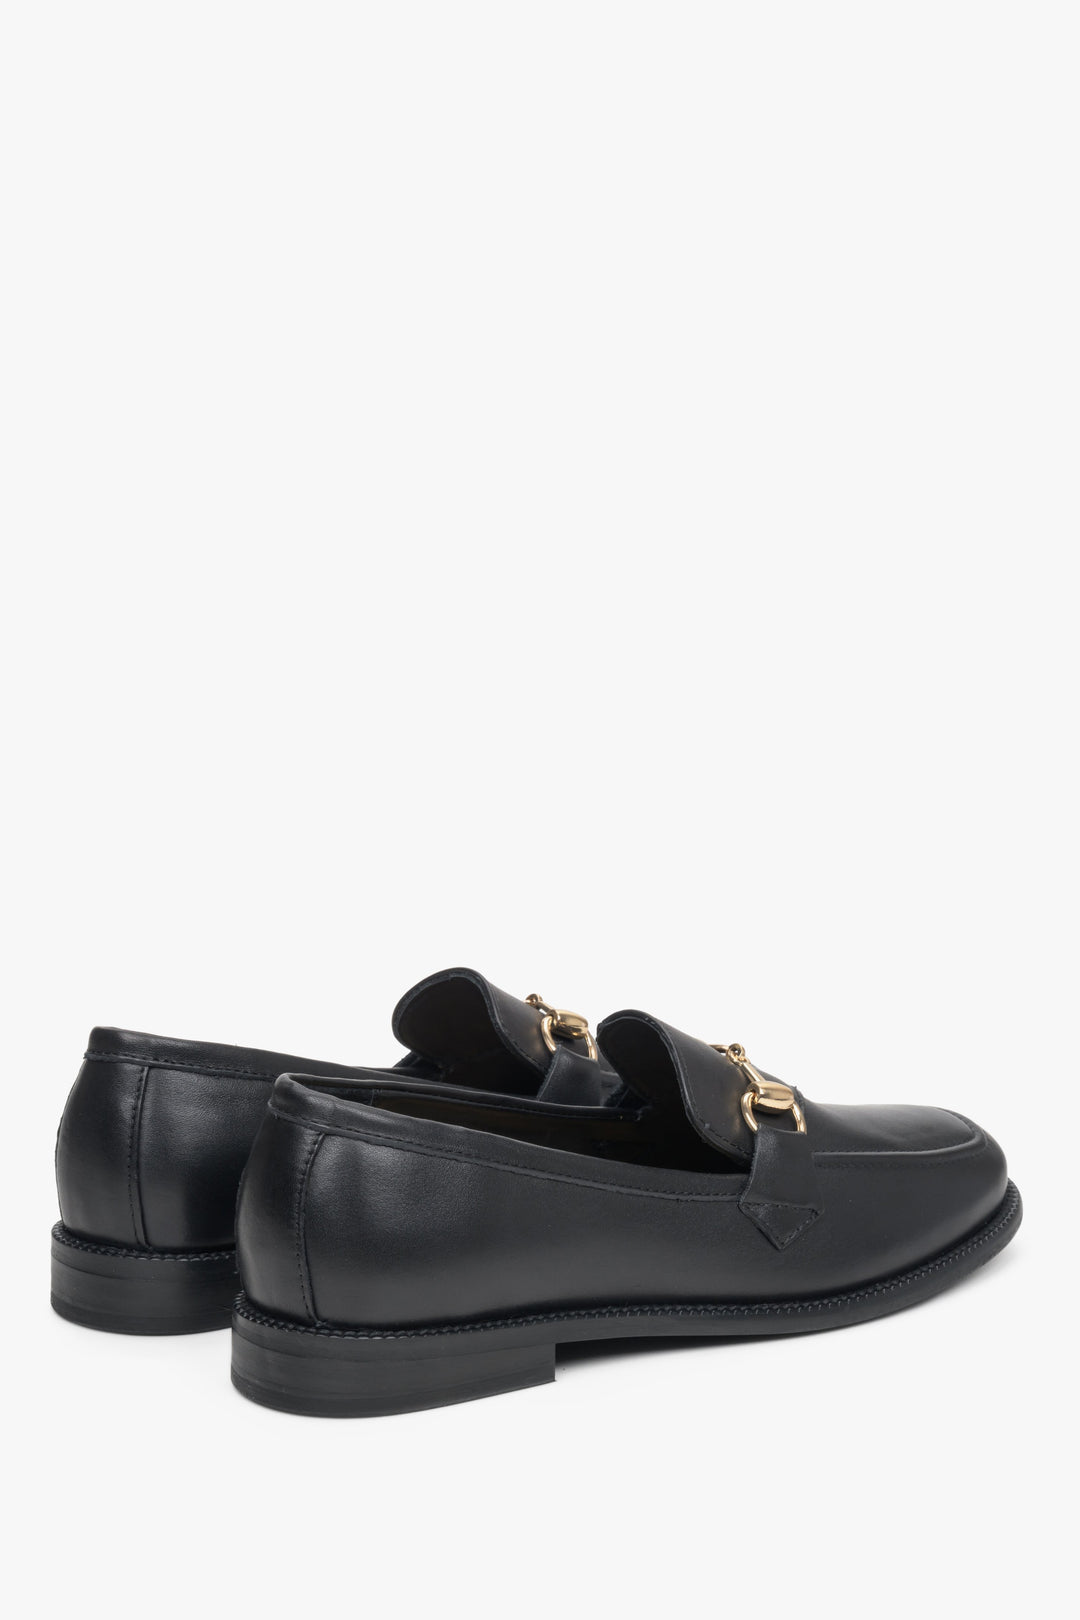 Women's Black Italian Leather Loafers with Gold Buckle - heel counter.